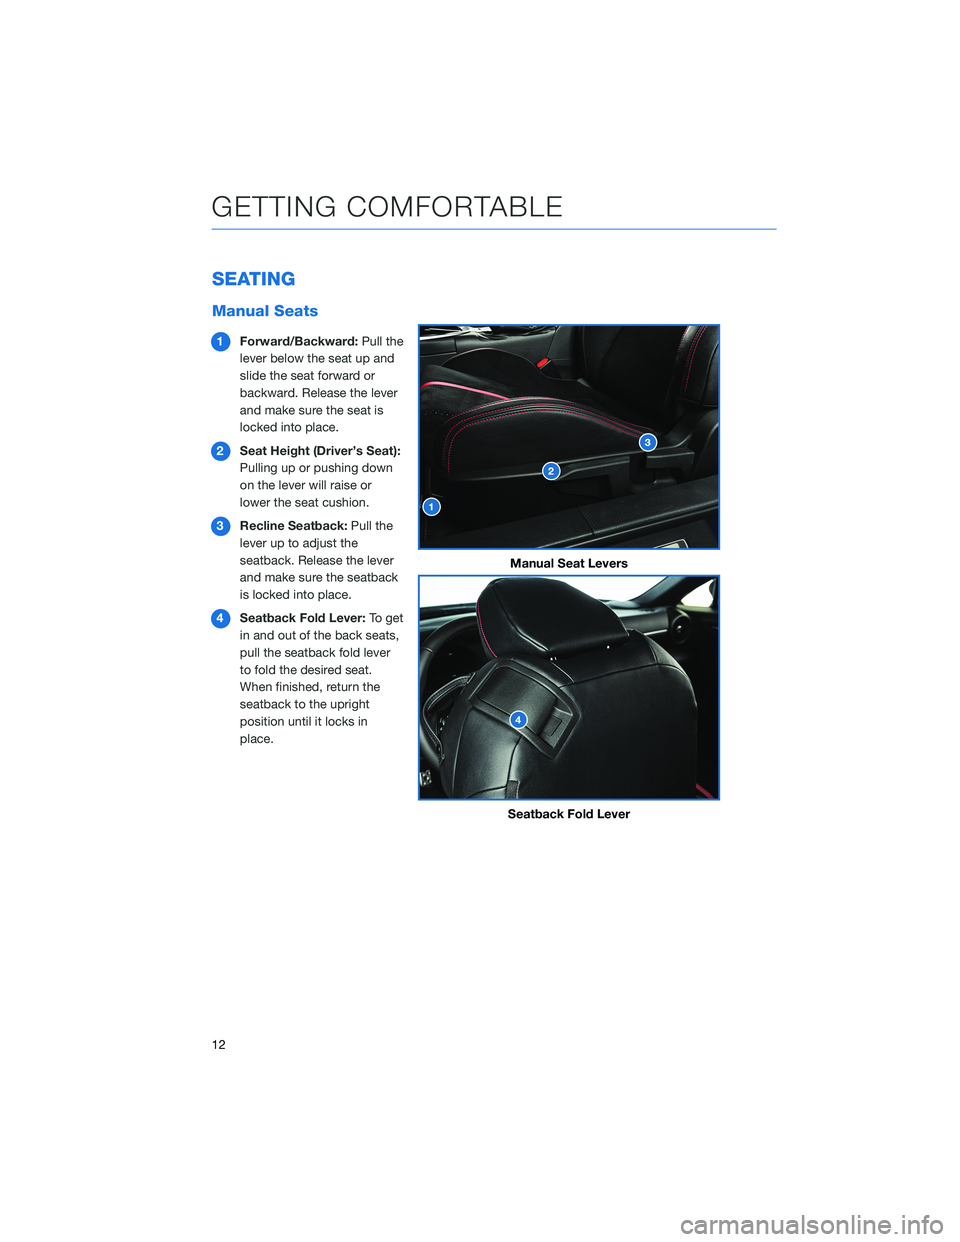 SUBARU BRZ 2022  Getting Started Guide SEATING
Manual Seats
1Forward/Backward:Pull the
lever below the seat up and
slide the seat forward or
backward. Release the lever
and make sure the seat is
locked into place.
2Seat Height (Driver’s 